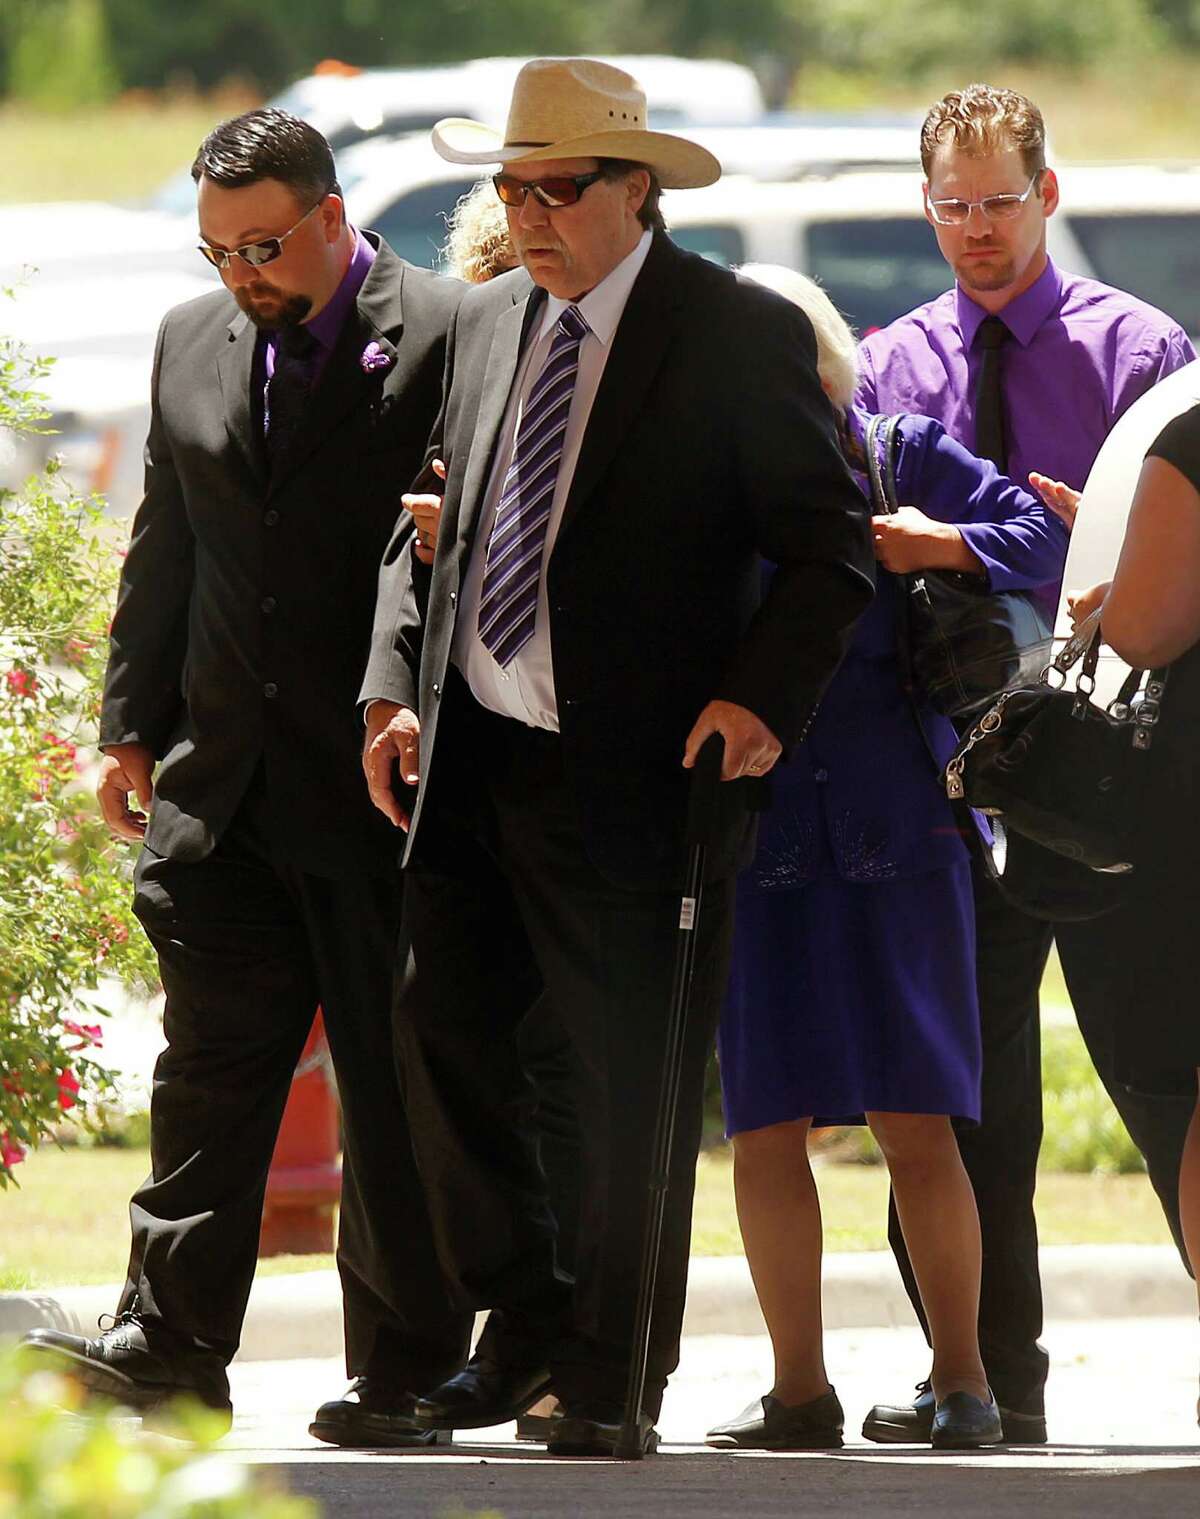 Father Wilson "Donnie" Golden walks in front of son-in-law Keith Schuchardt as the family arrives to the funeral service of Kala Marie Golden-Schuchardt at First Baptist Church on Tuesday, April 24, 2012, in Willis. Kala Marie Golden-Schuchardt passed away on Tuesday, April 17, 2012 in the Woodlands. Verna McClain is accused of shooting Kala Golden-Schuchardt to death as she was leaving the Northwoods Pediatric Center, and kidnapping Keegan Schuchardt.